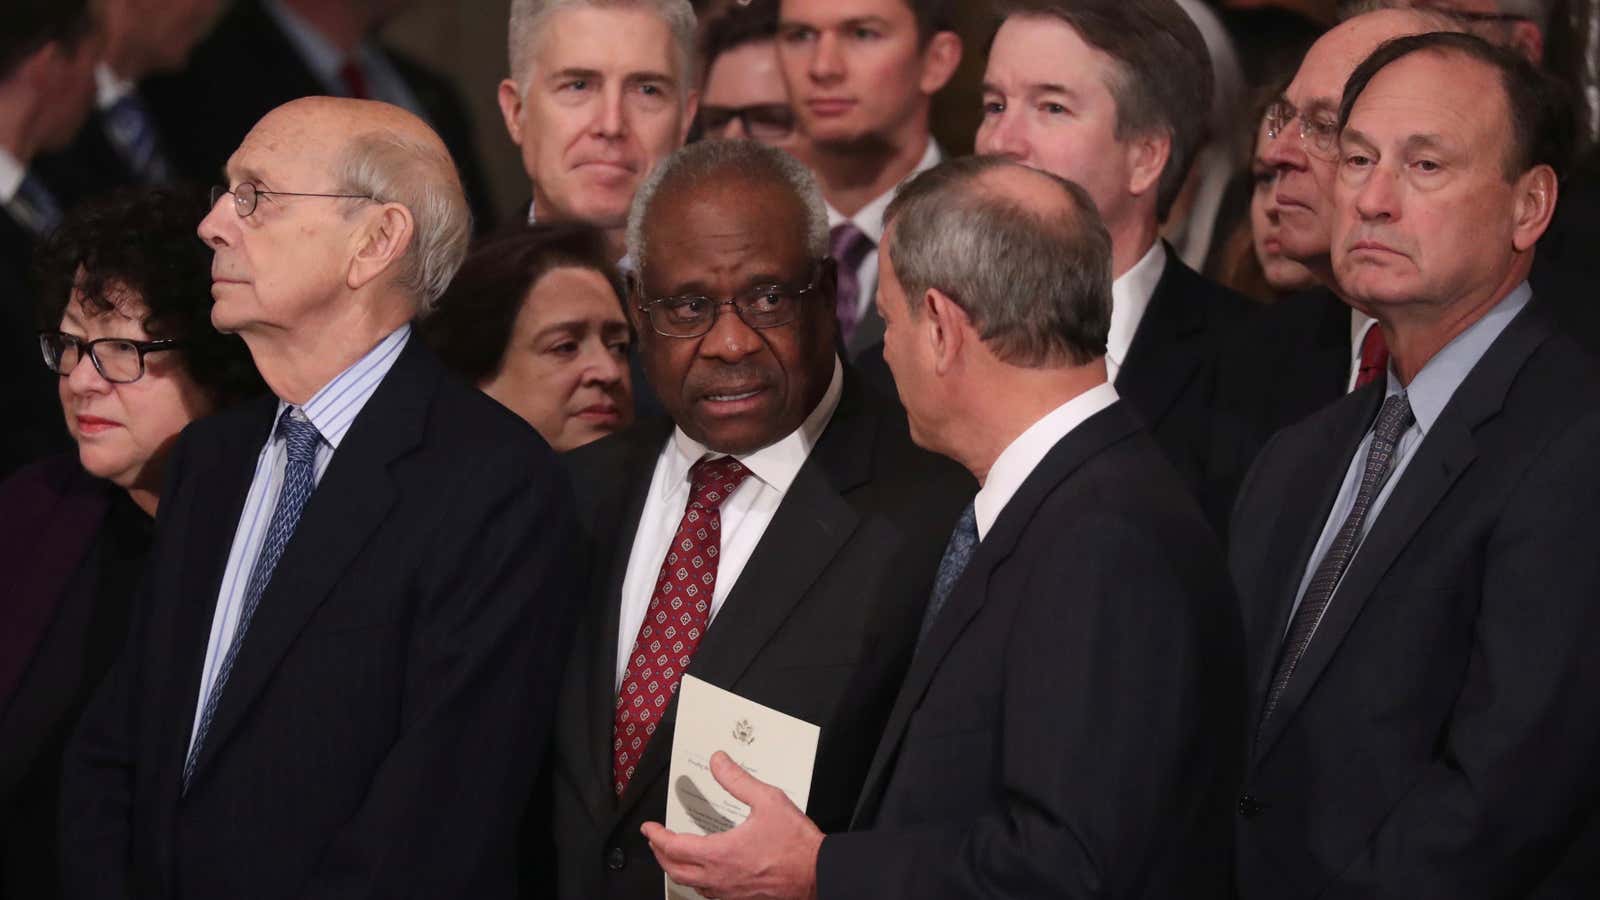 Should SCOTUS justices be more circumspect?